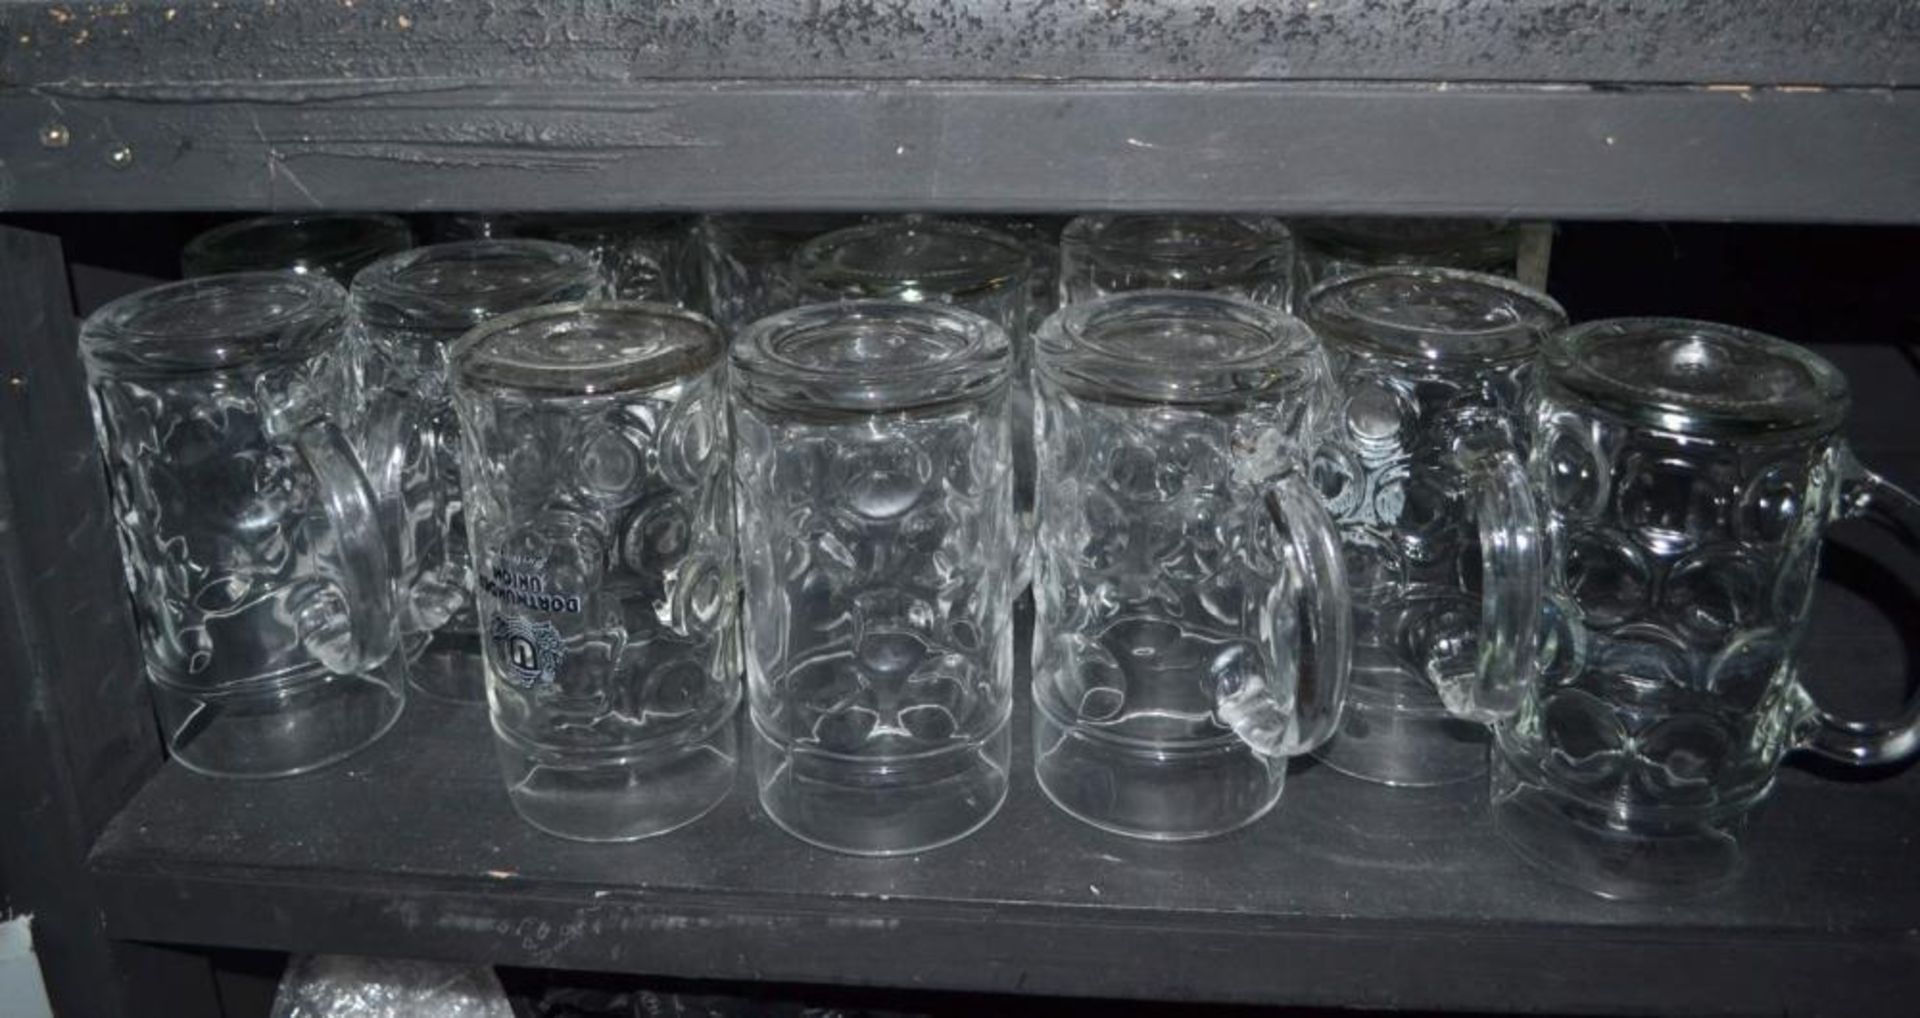 1 x Large Collection of Wine Glasses, Beer Jugs and Glassware - Includes Approx 400 Pieces - Ref BB5 - Image 12 of 13